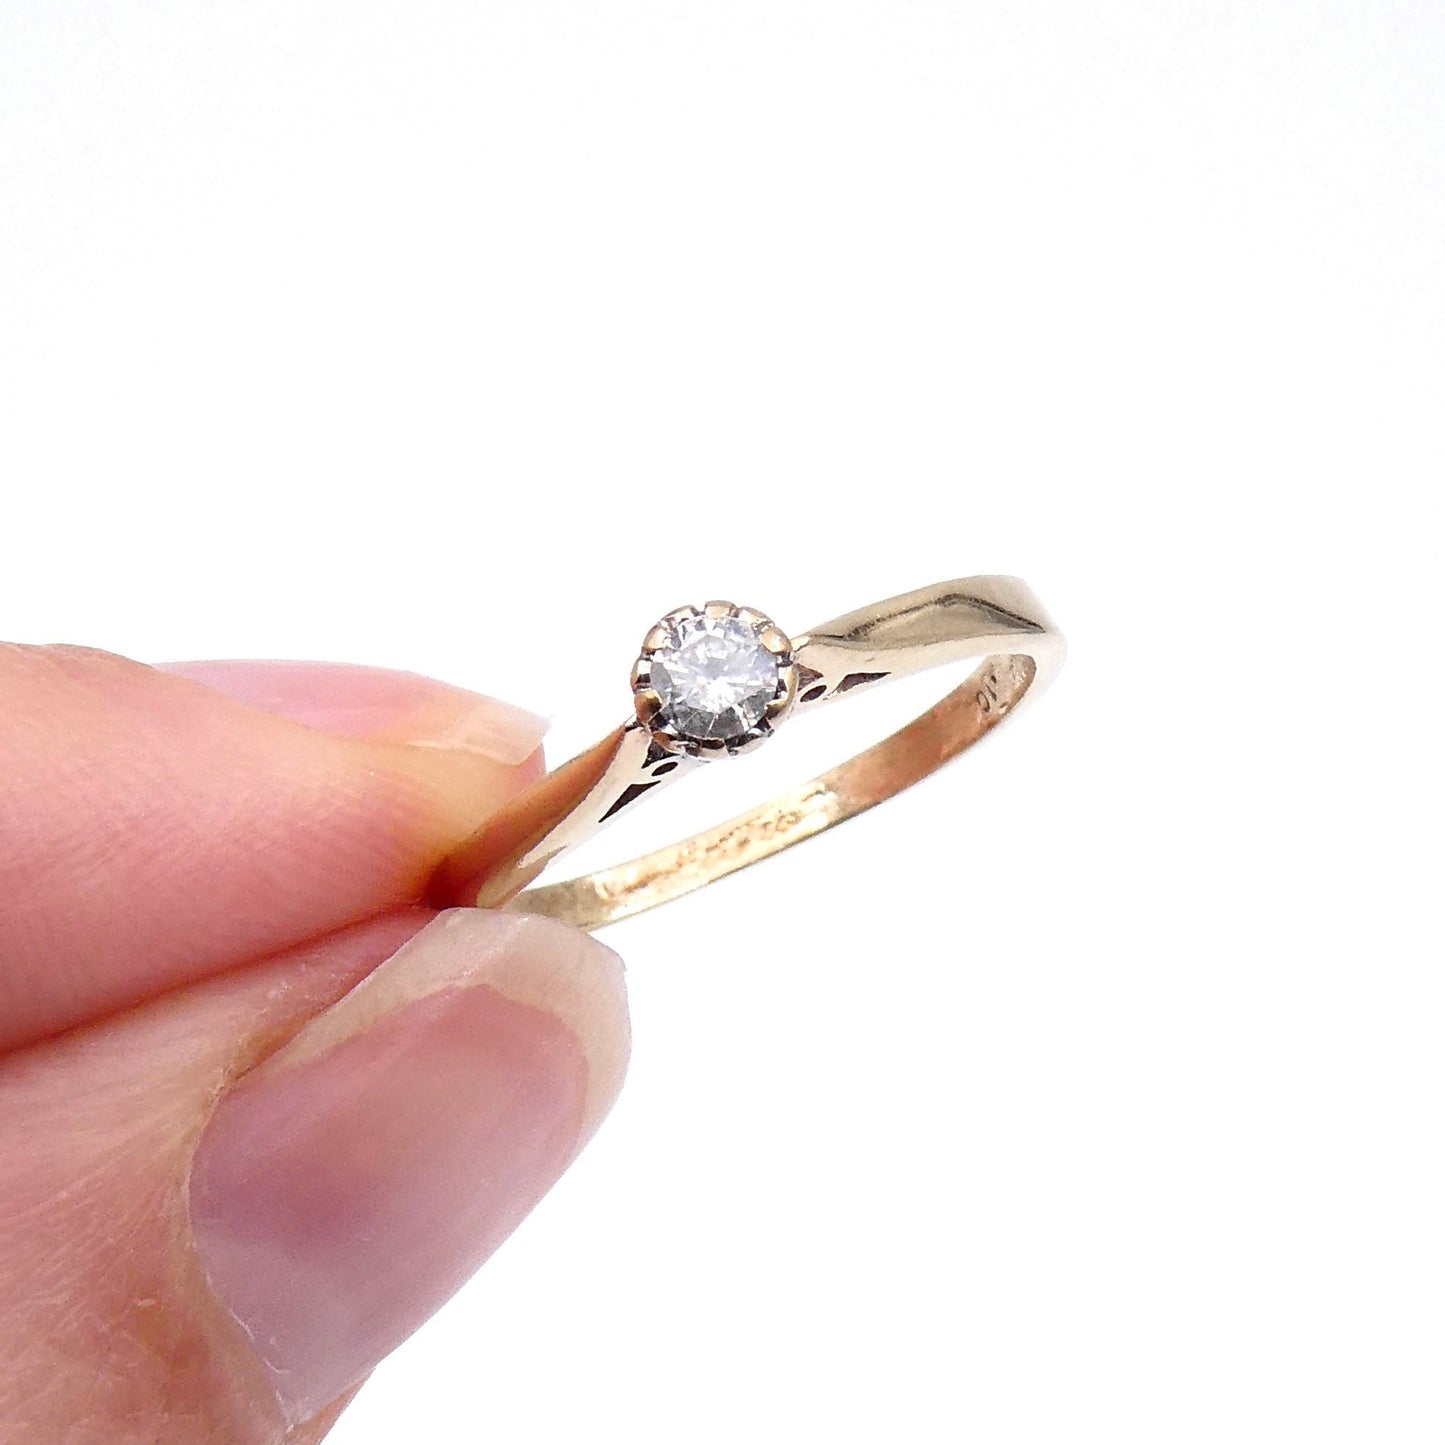 Vintage gray diamond solitaire ring, a small diamond ring set in 9kt gold, a recent vintage diamond ring. - Collected